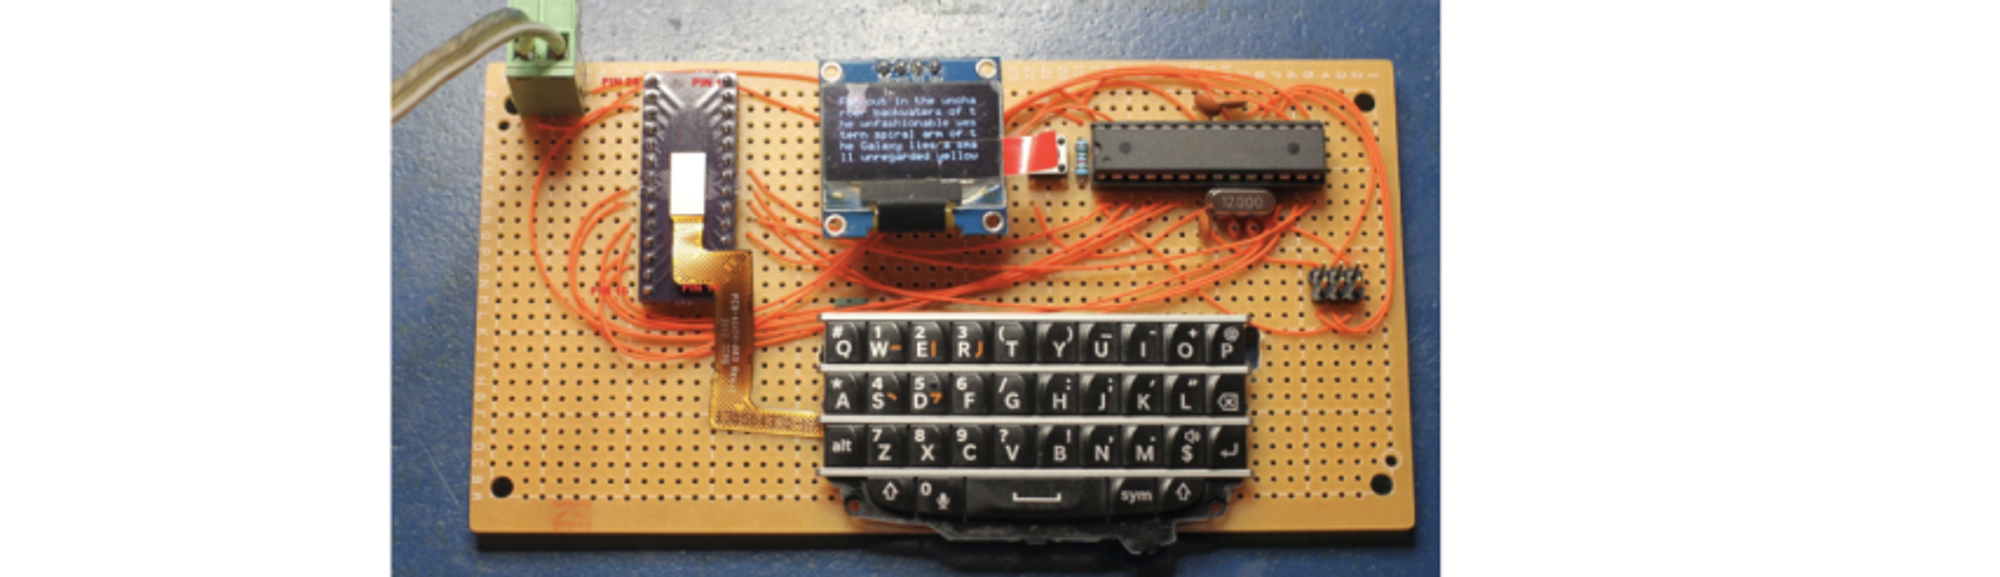 Interfacing a BlackBerry Q10 keyboard into your microcontroller project #BlackBerry #Arduino #Microcontroller